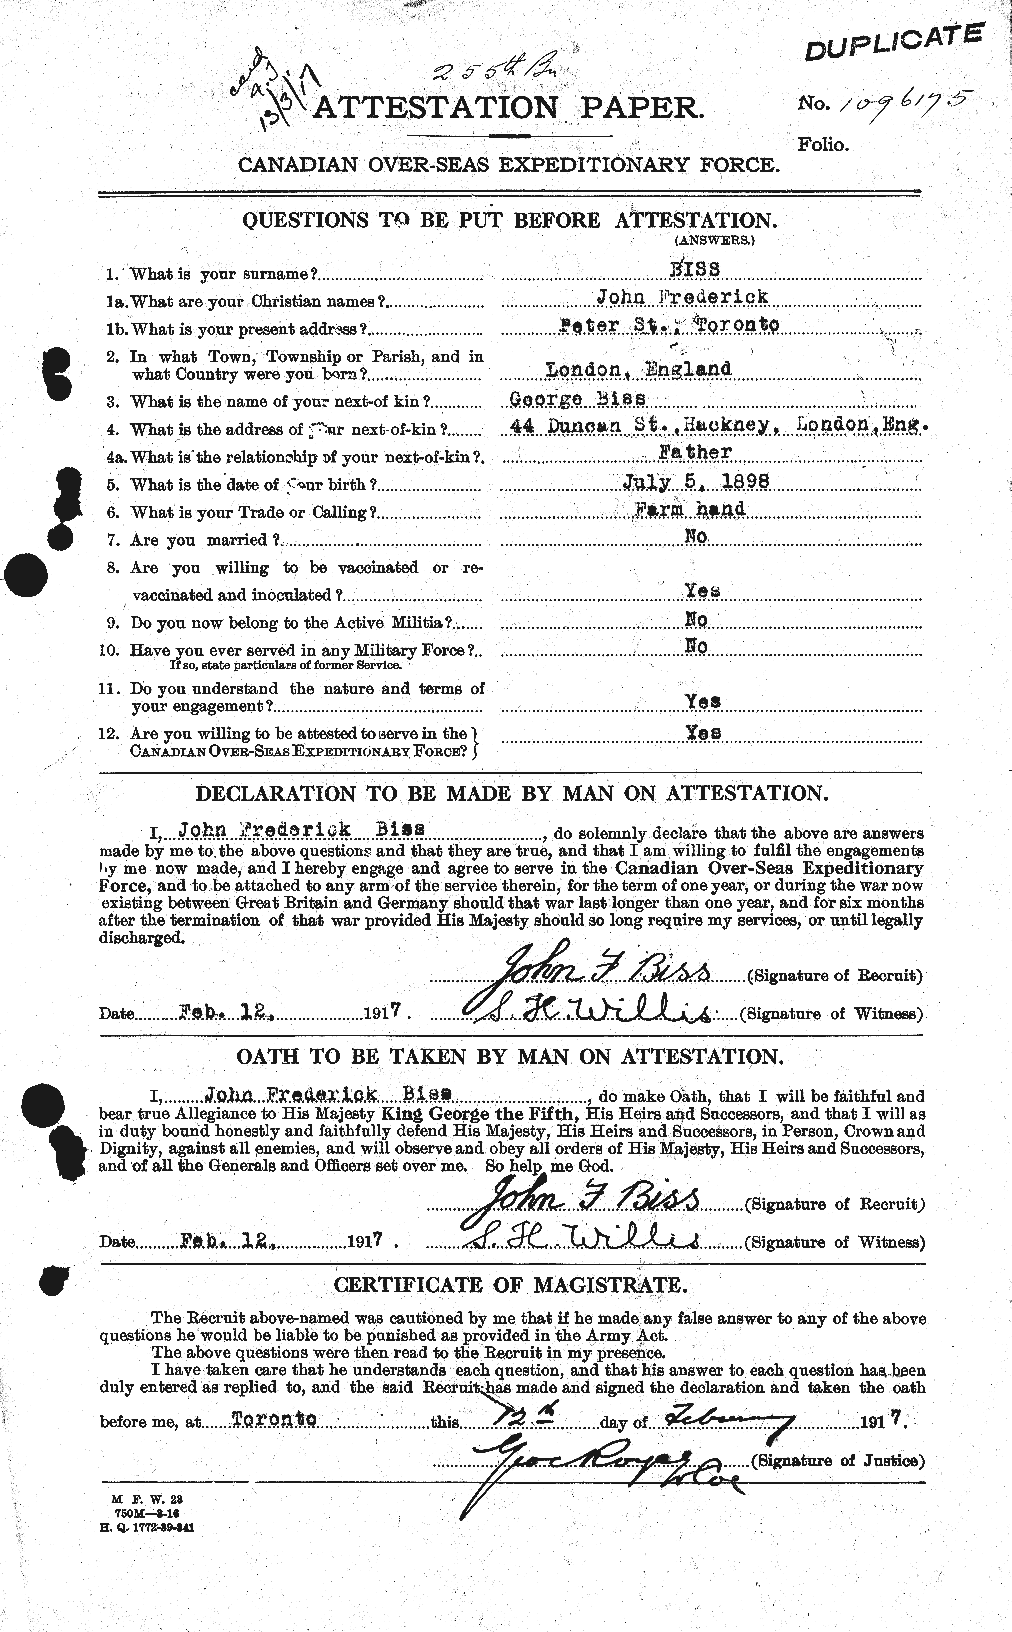 Personnel Records of the First World War - CEF 245682a